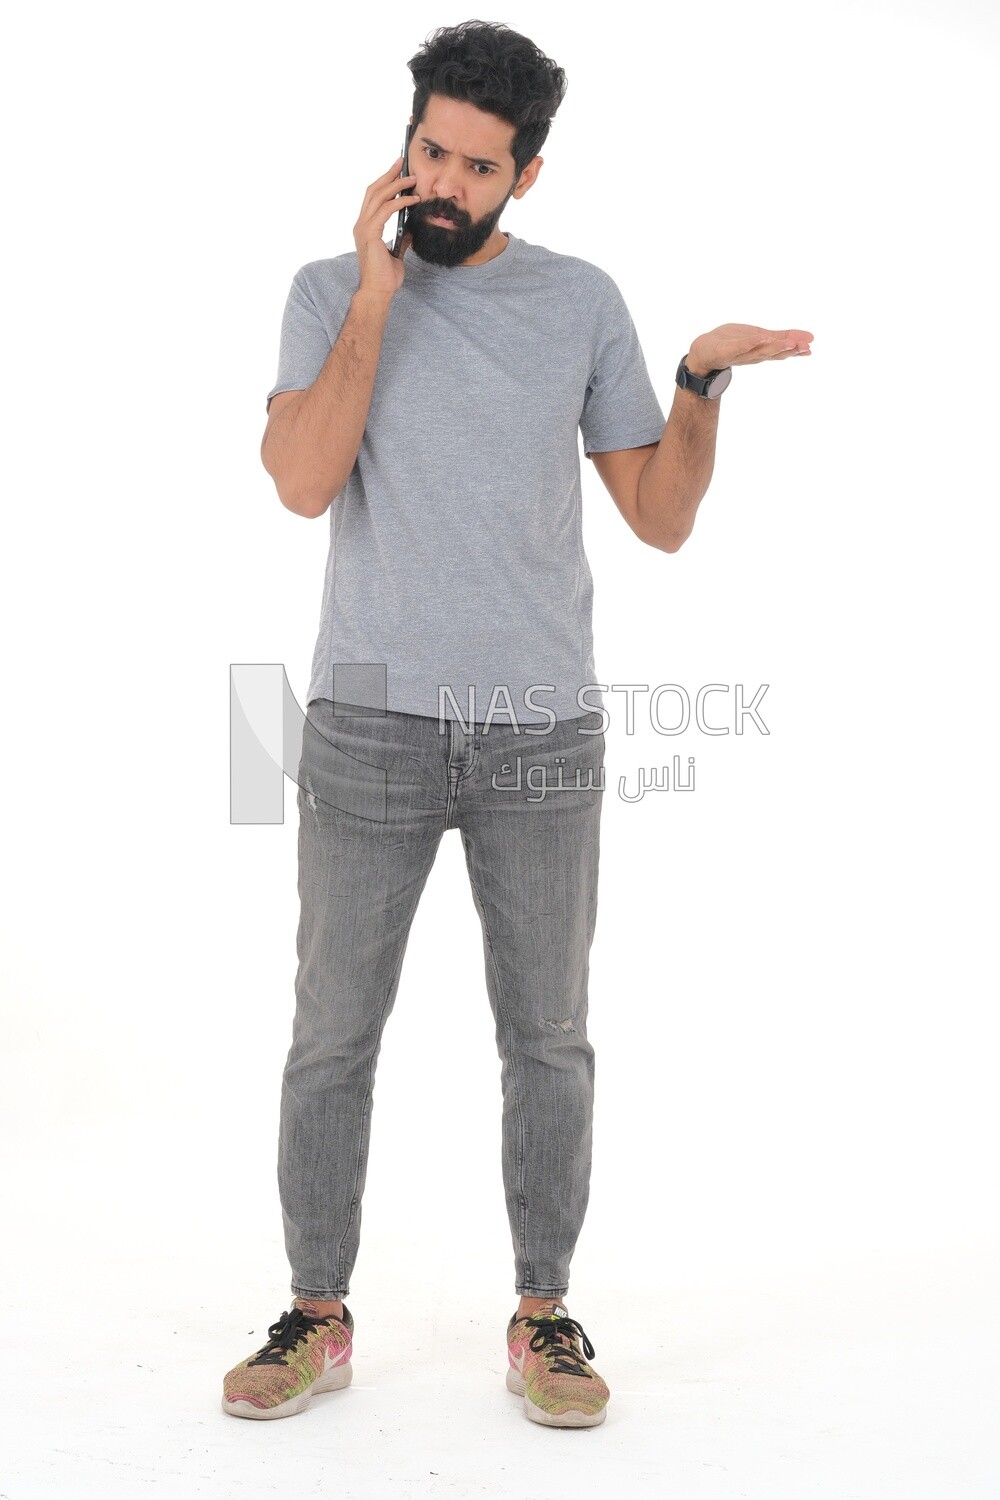 close-up of a Saudi man looking angry, wearing casual clothes, carrying his mobile phone, Saudi model, white background